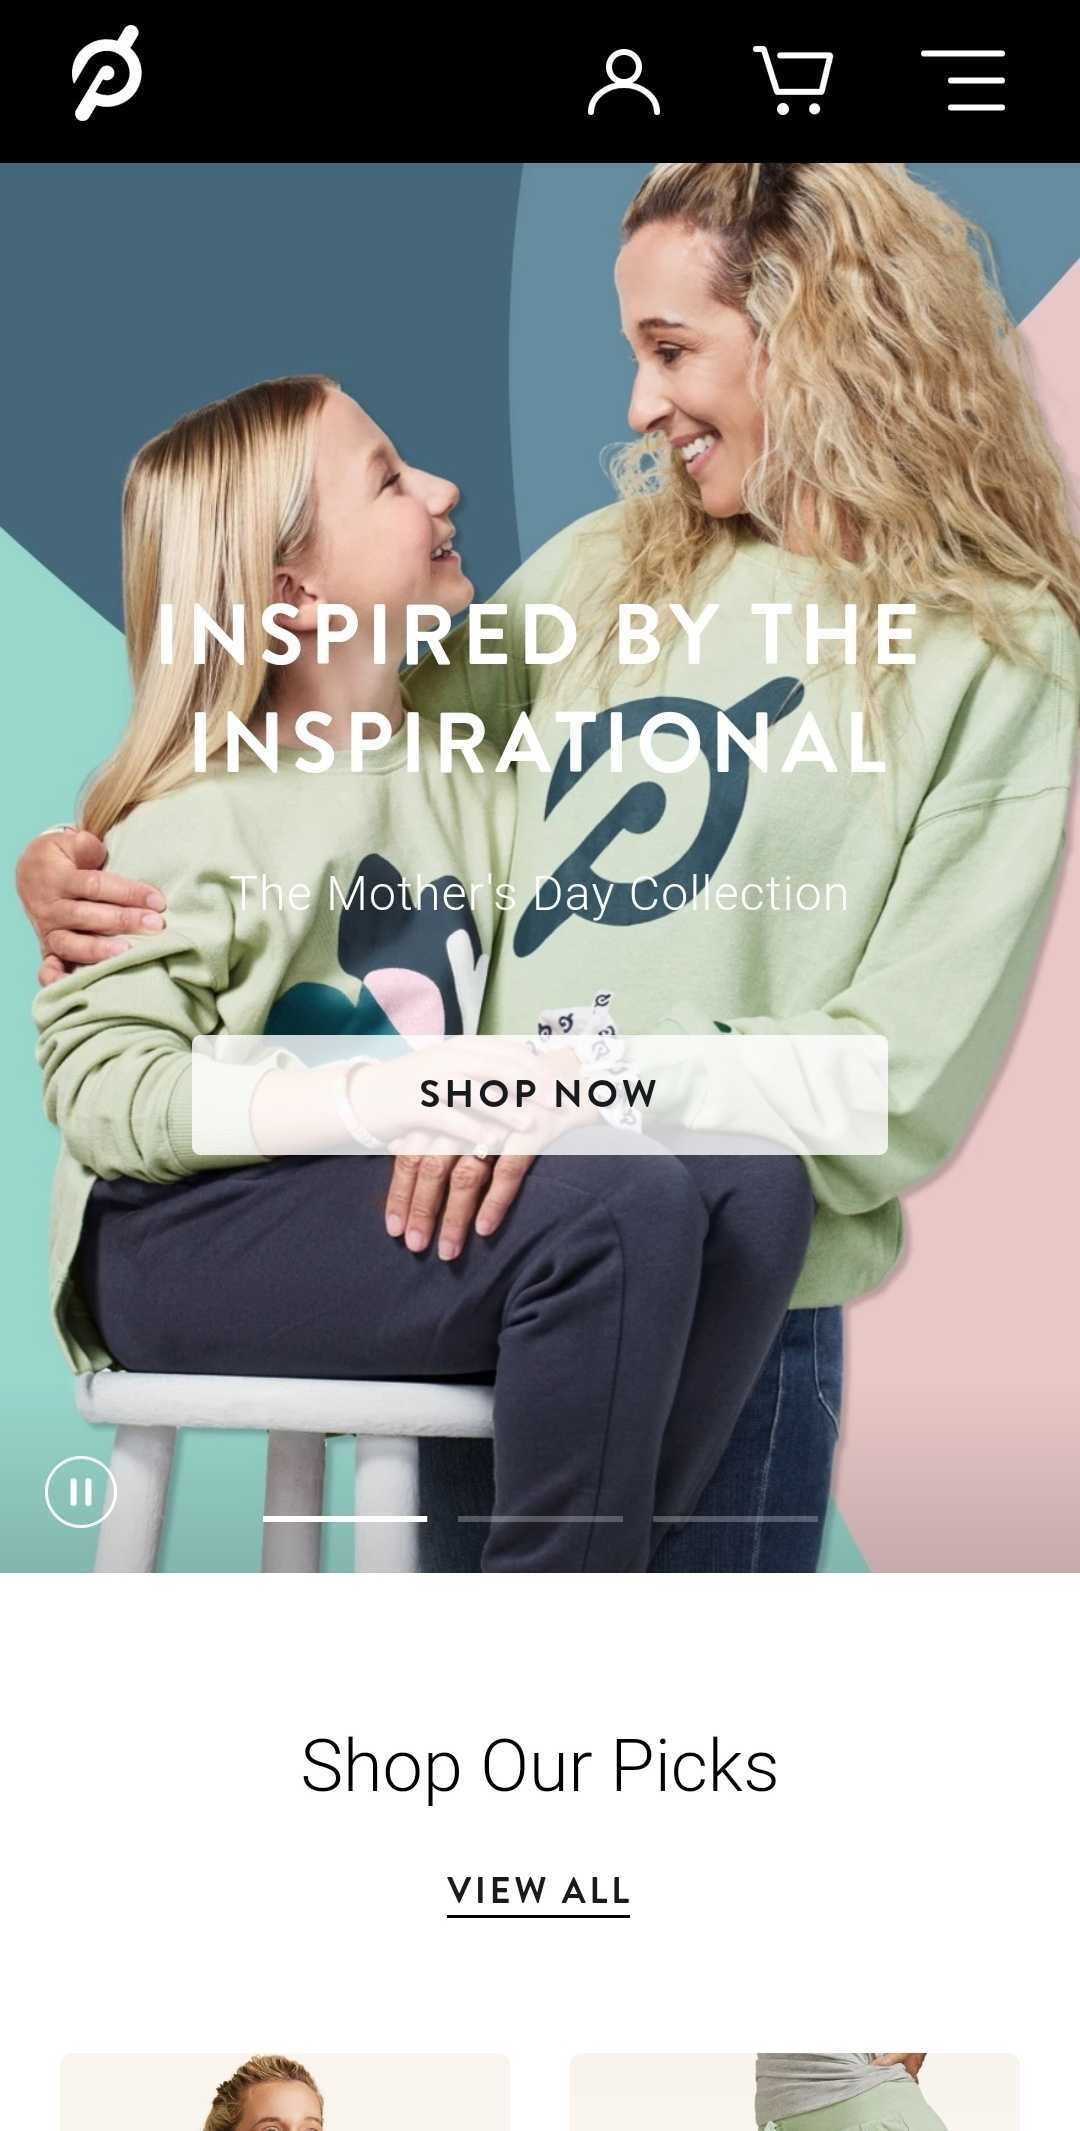 Mobile screenshot of Peloton Apparel's 'Inspired by the Inspirational' collection